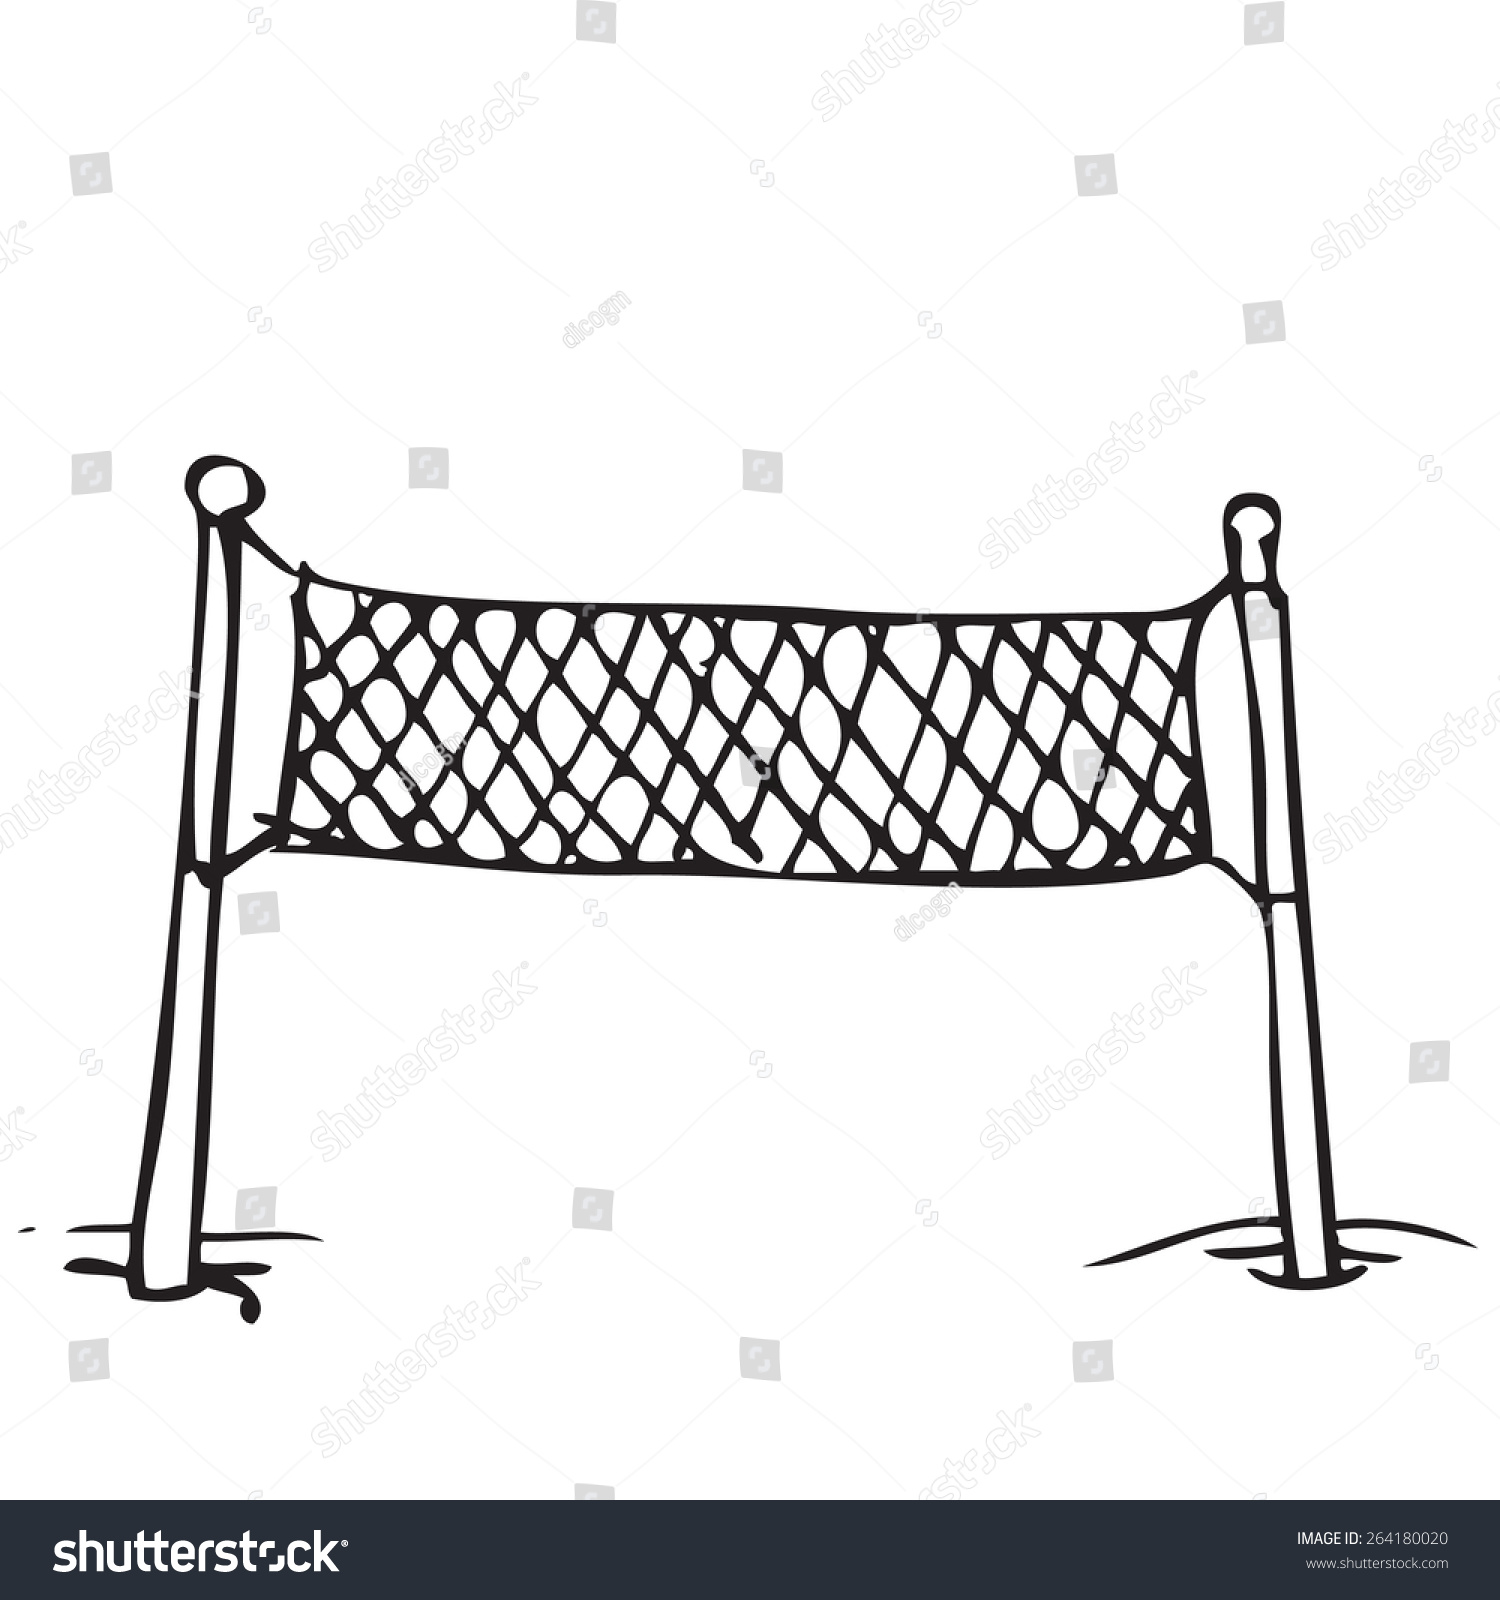 volleyball net clipart free - photo #48